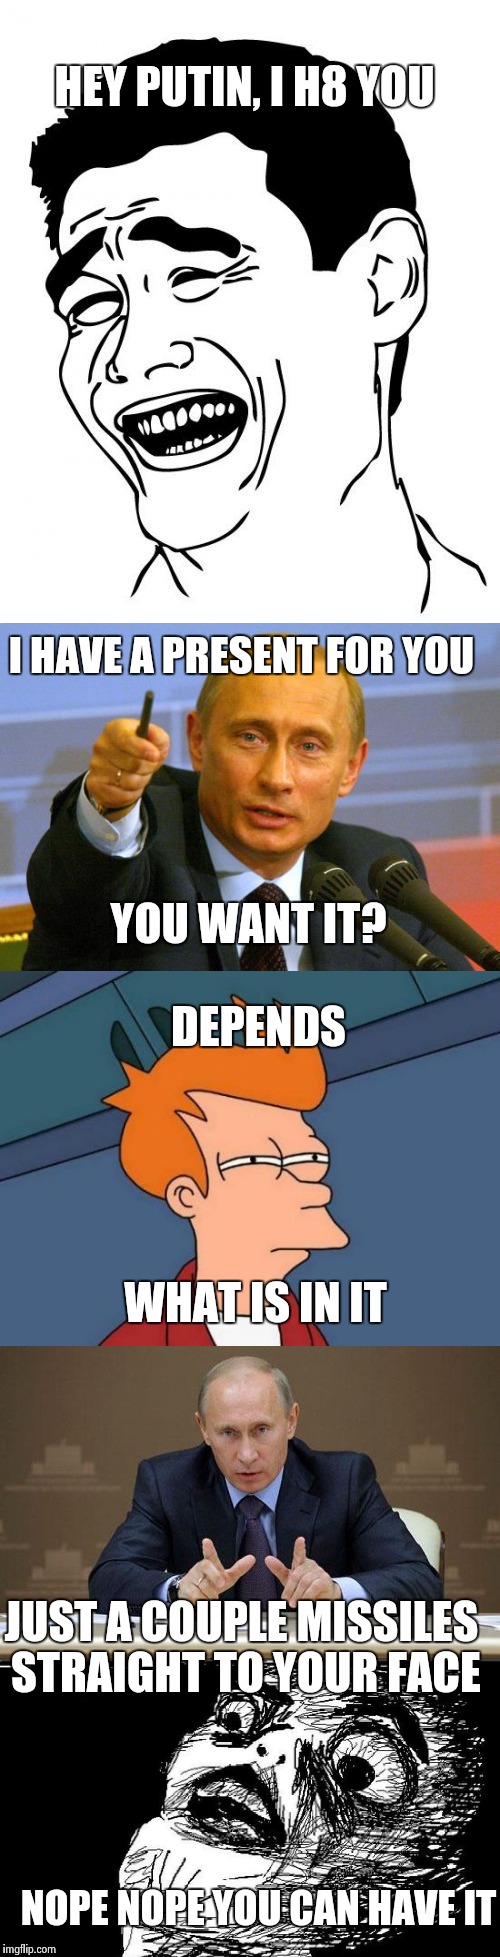 Gifts from Putin with love | HEY PUTIN, I H8 YOU; I HAVE A PRESENT FOR YOU; YOU WANT IT? DEPENDS; WHAT IS IN IT; JUST A COUPLE MISSILES STRAIGHT TO YOUR FACE; NOPE NOPE YOU CAN HAVE IT | image tagged in putin,present | made w/ Imgflip meme maker